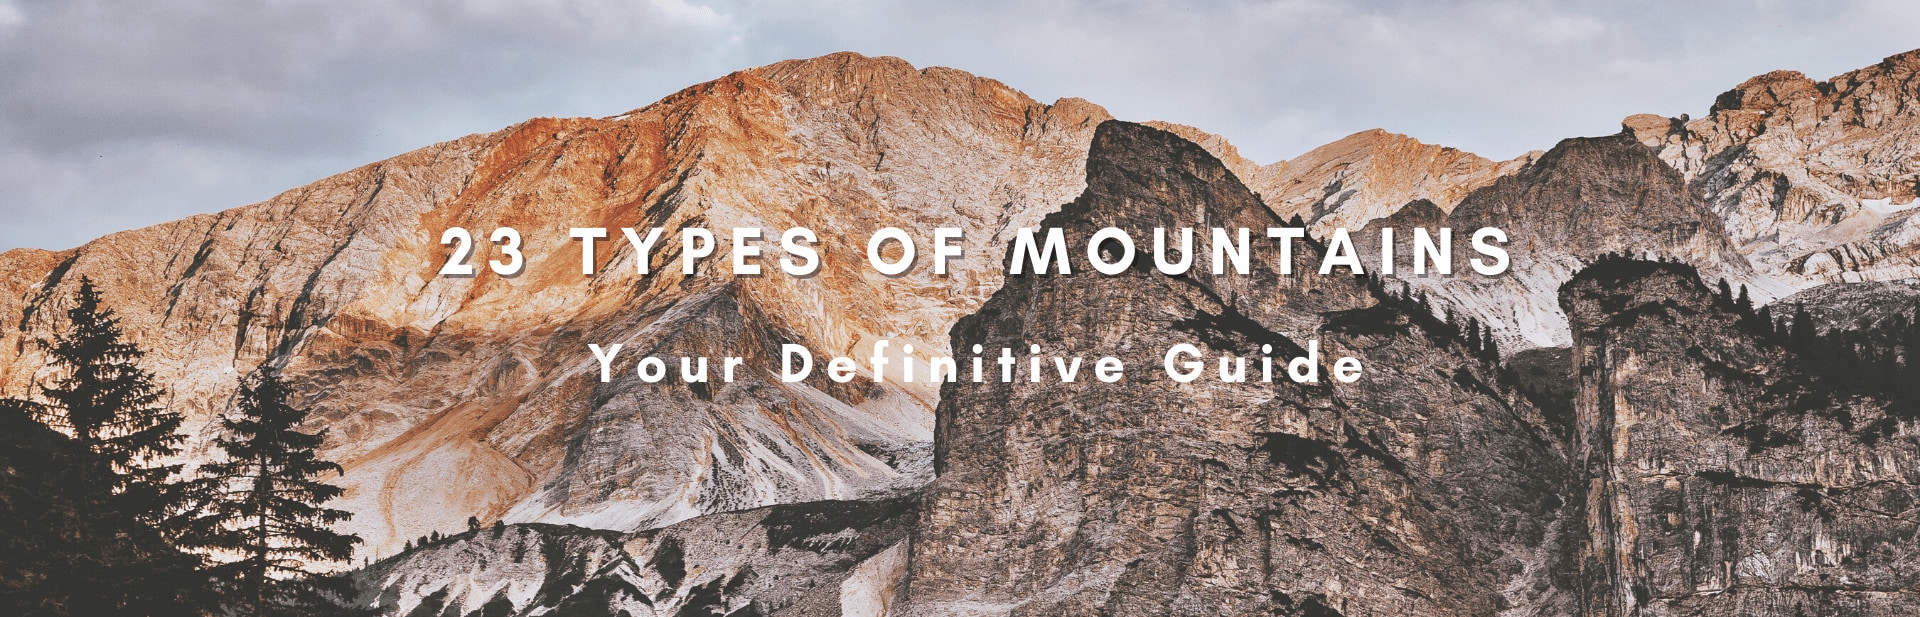 23 Types Of Mountains: Your Definitive Guide